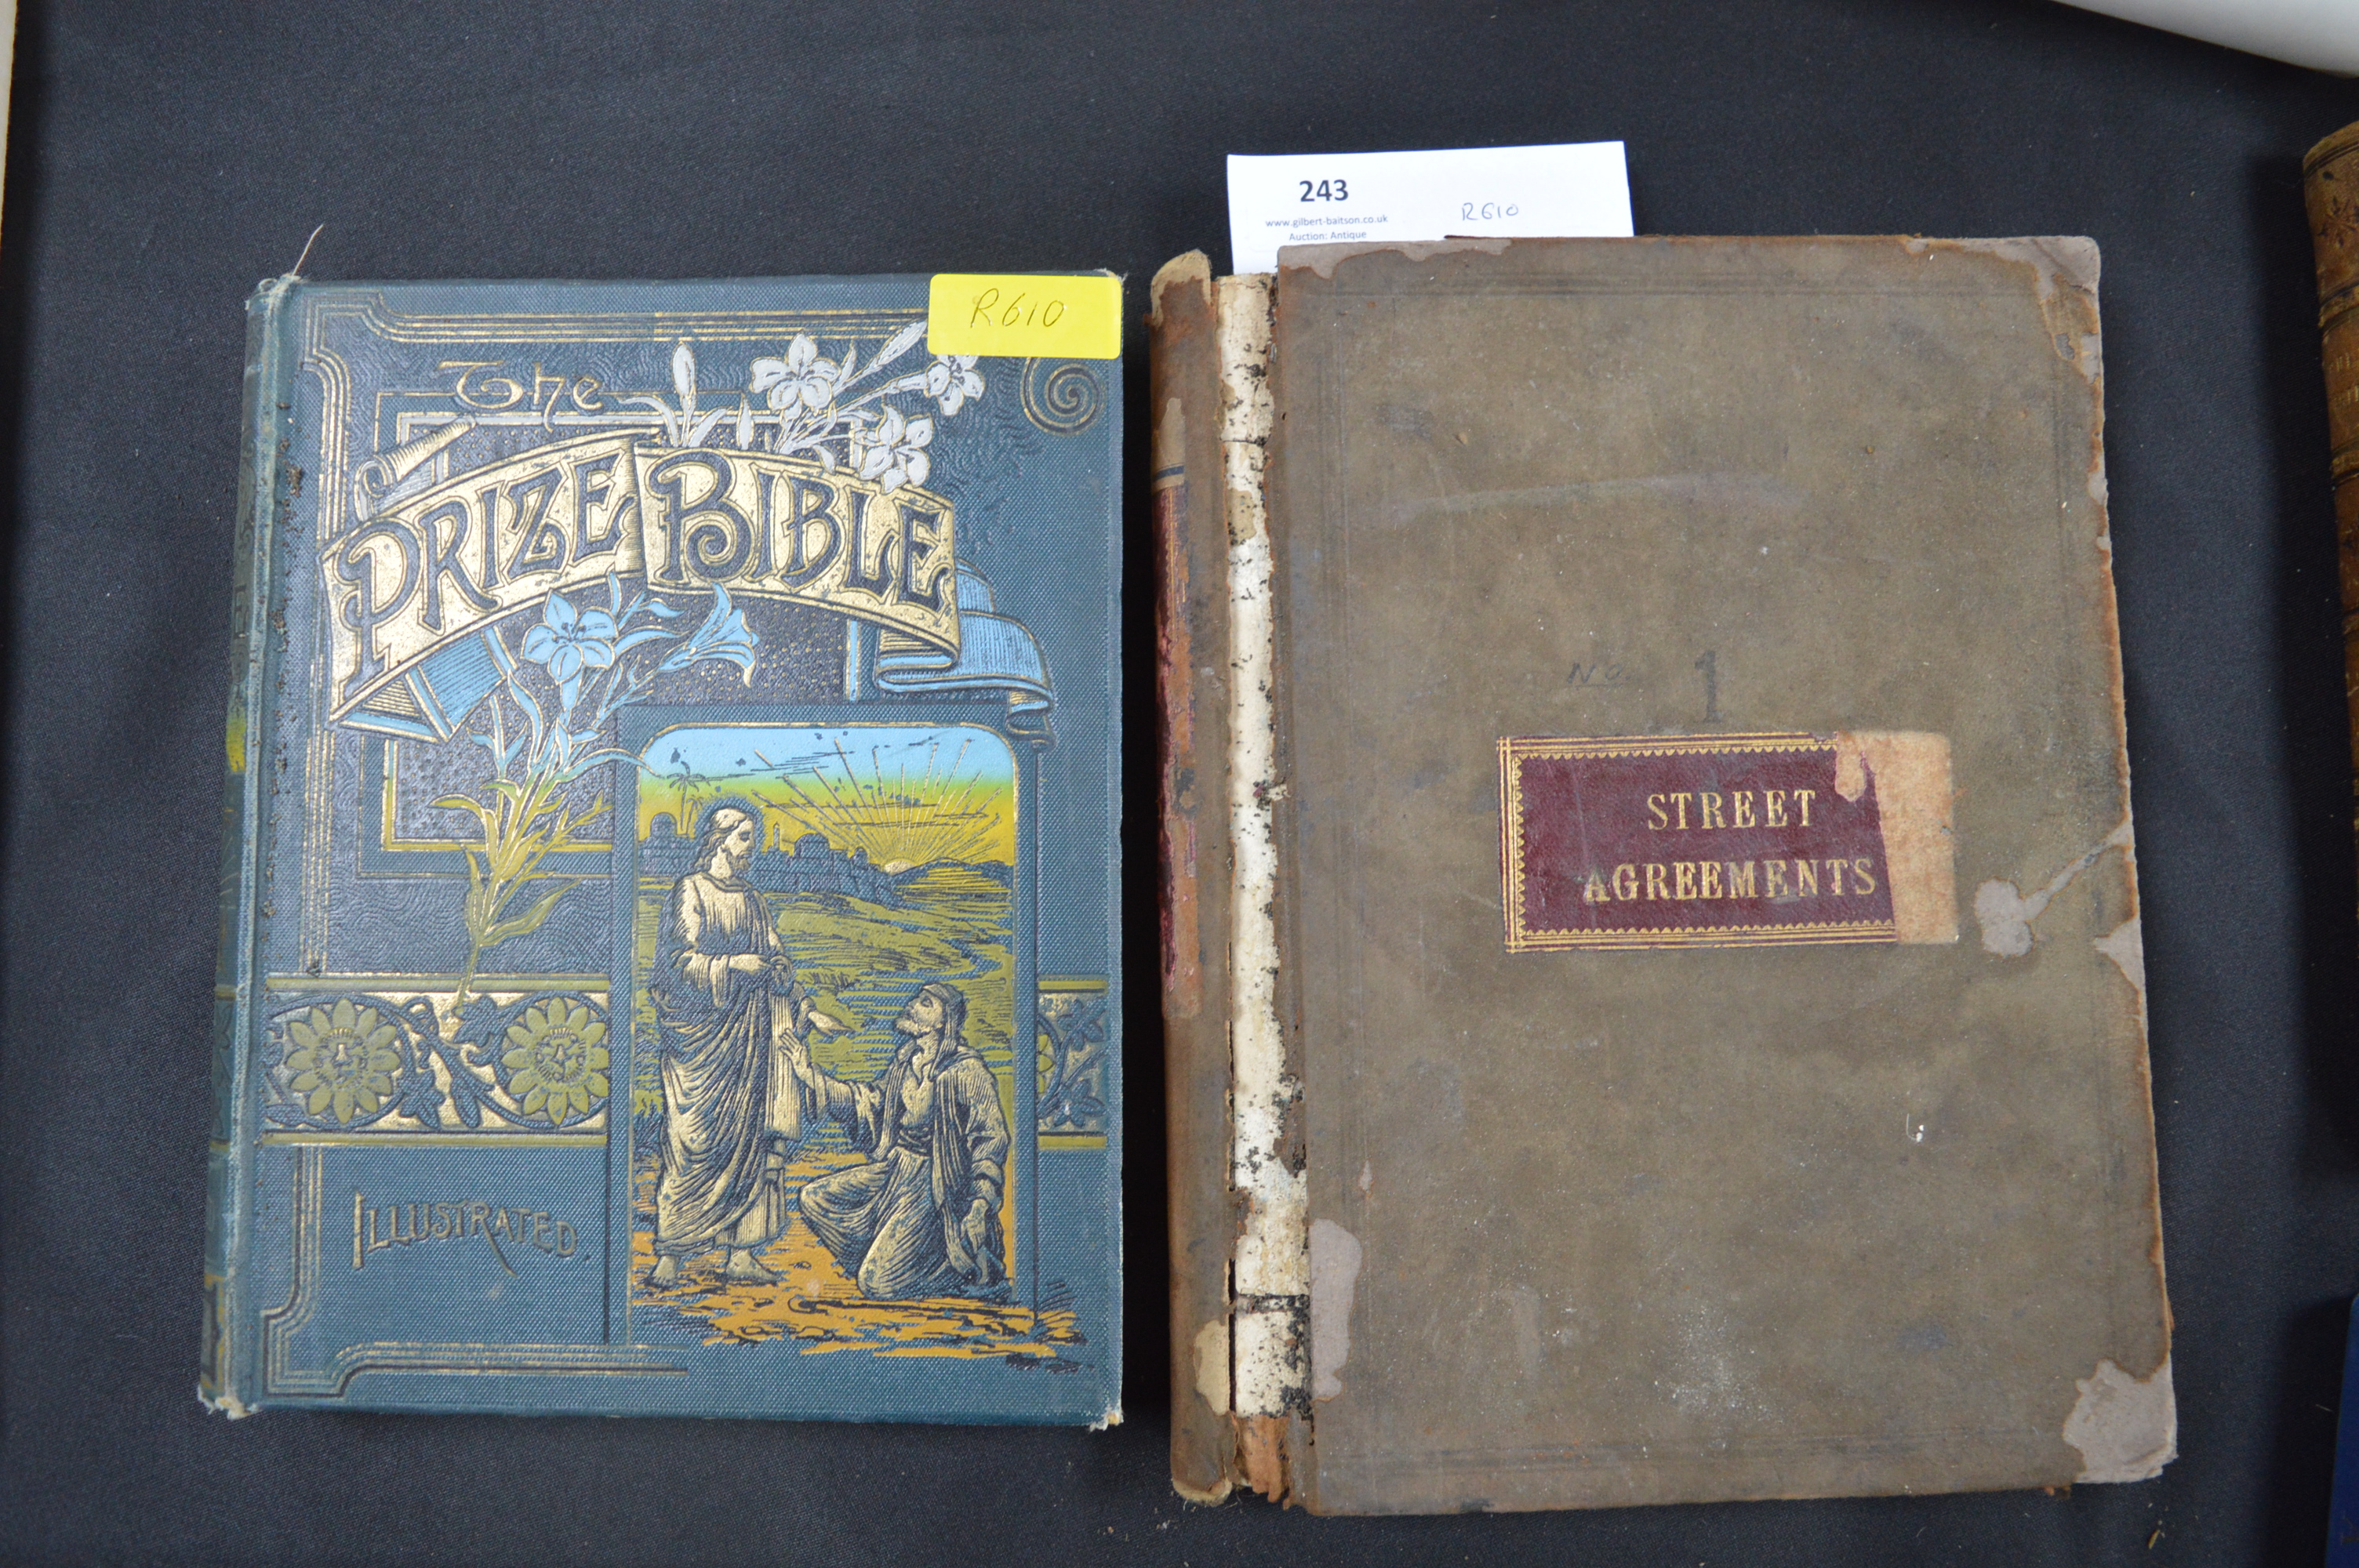 Hull Waterworks Street Agreements 1870 (slightly distressed), plus a Volume of the Prize Bible